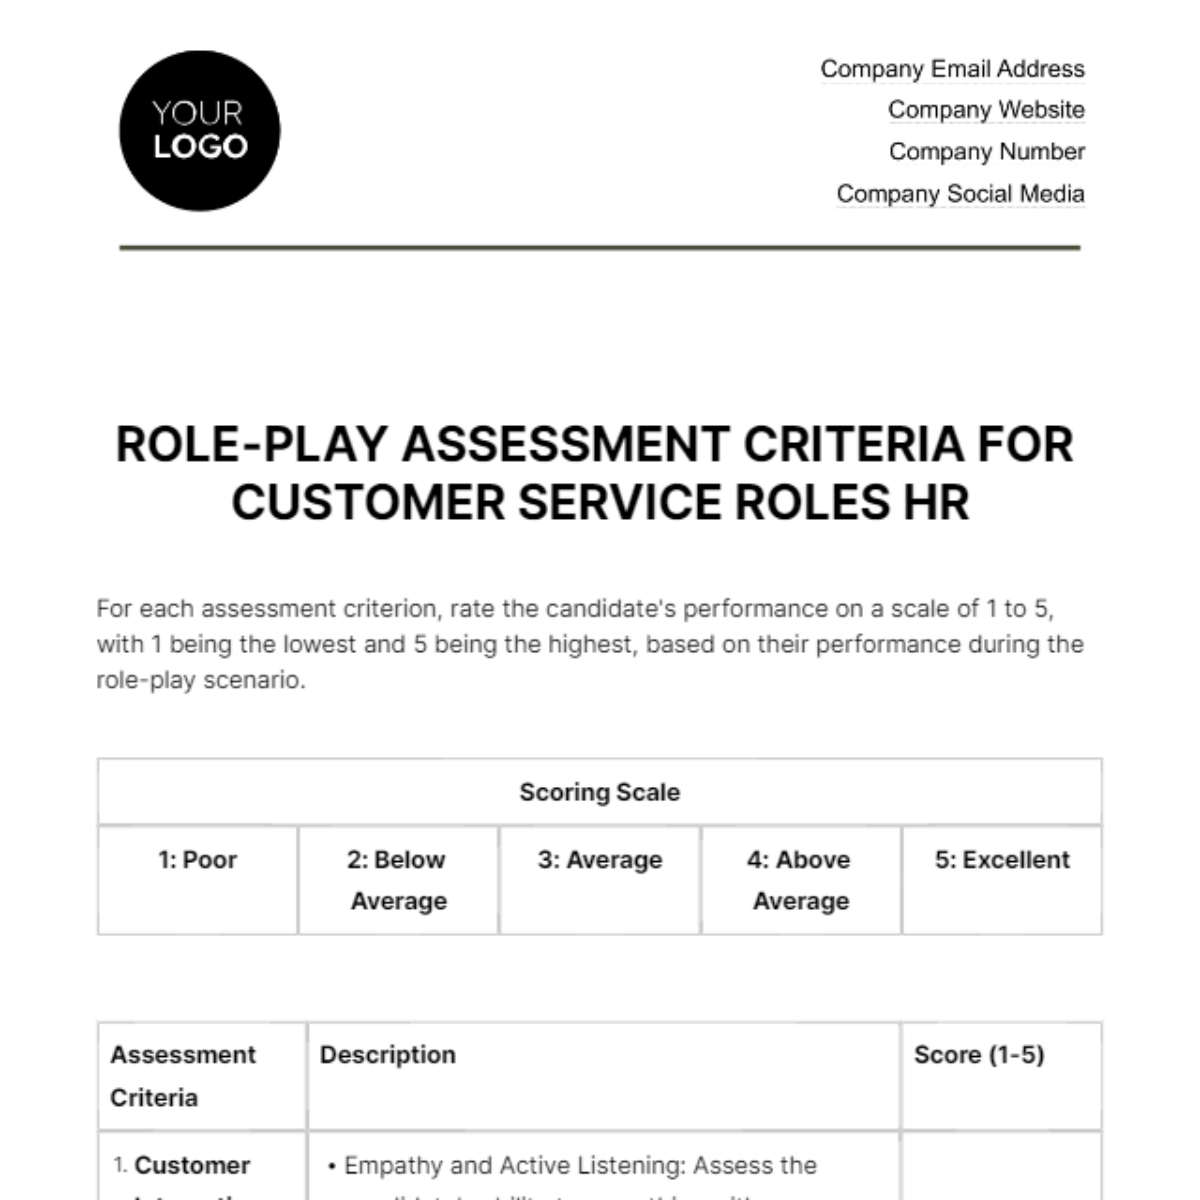 Role-play Assessment Criteria for Customer Service Roles HR Template